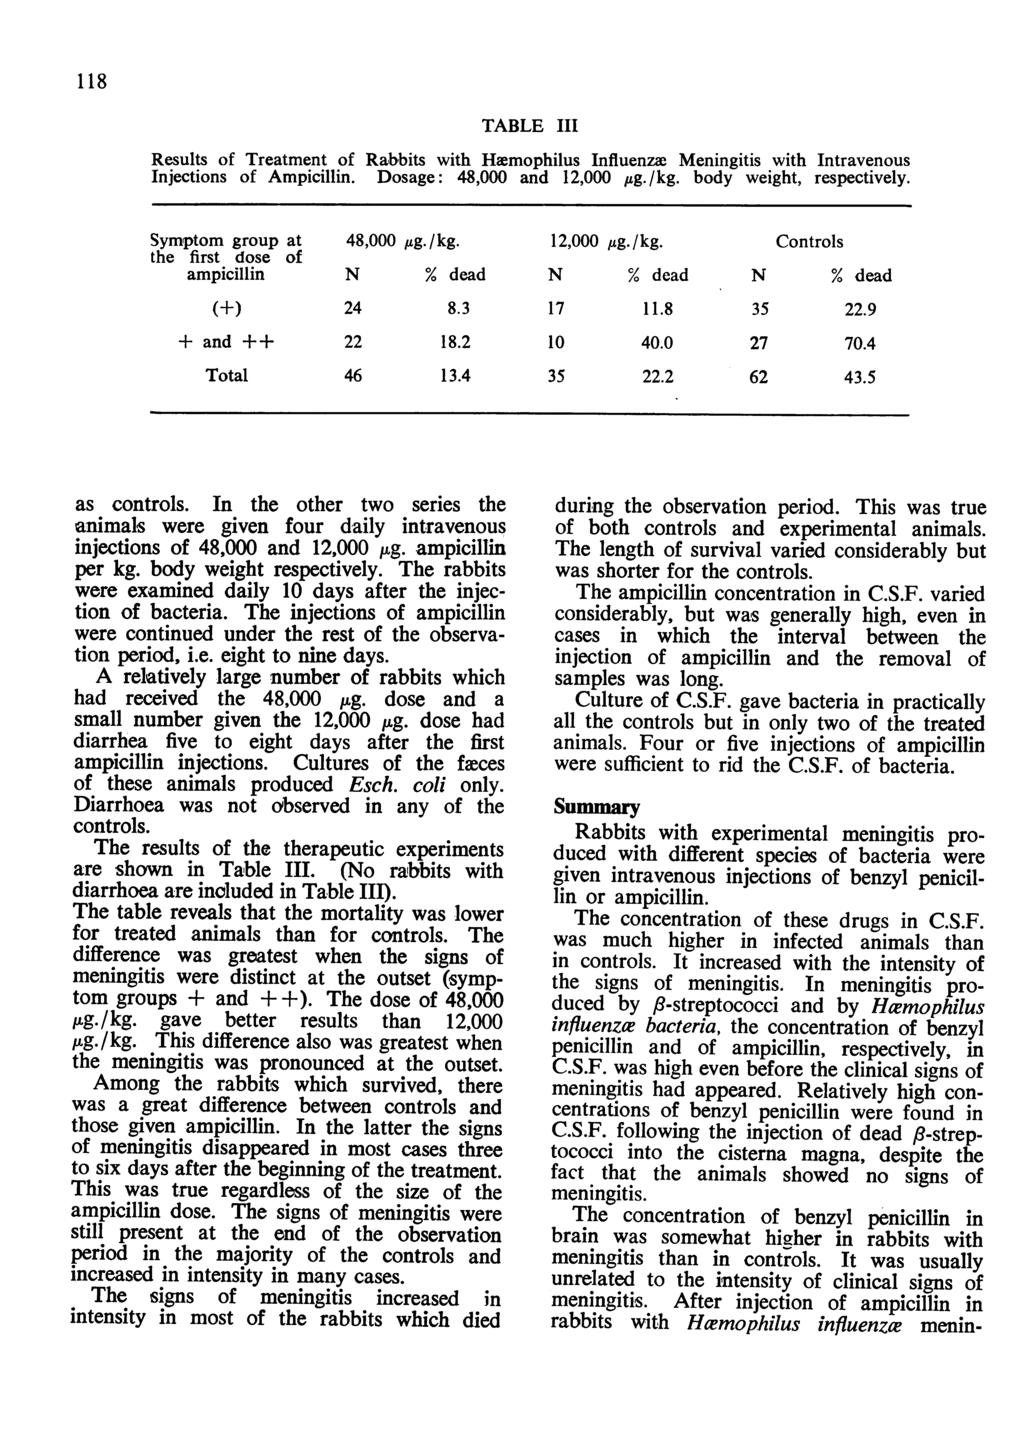 118 TABLE III Results of Treatment of Rabbits with Haemophilus Influenzae Meningitis with Intravenous Injections of Ampicillin. Dosage: 48,000 and 12,000 Ag./kg. body weight, respectively.